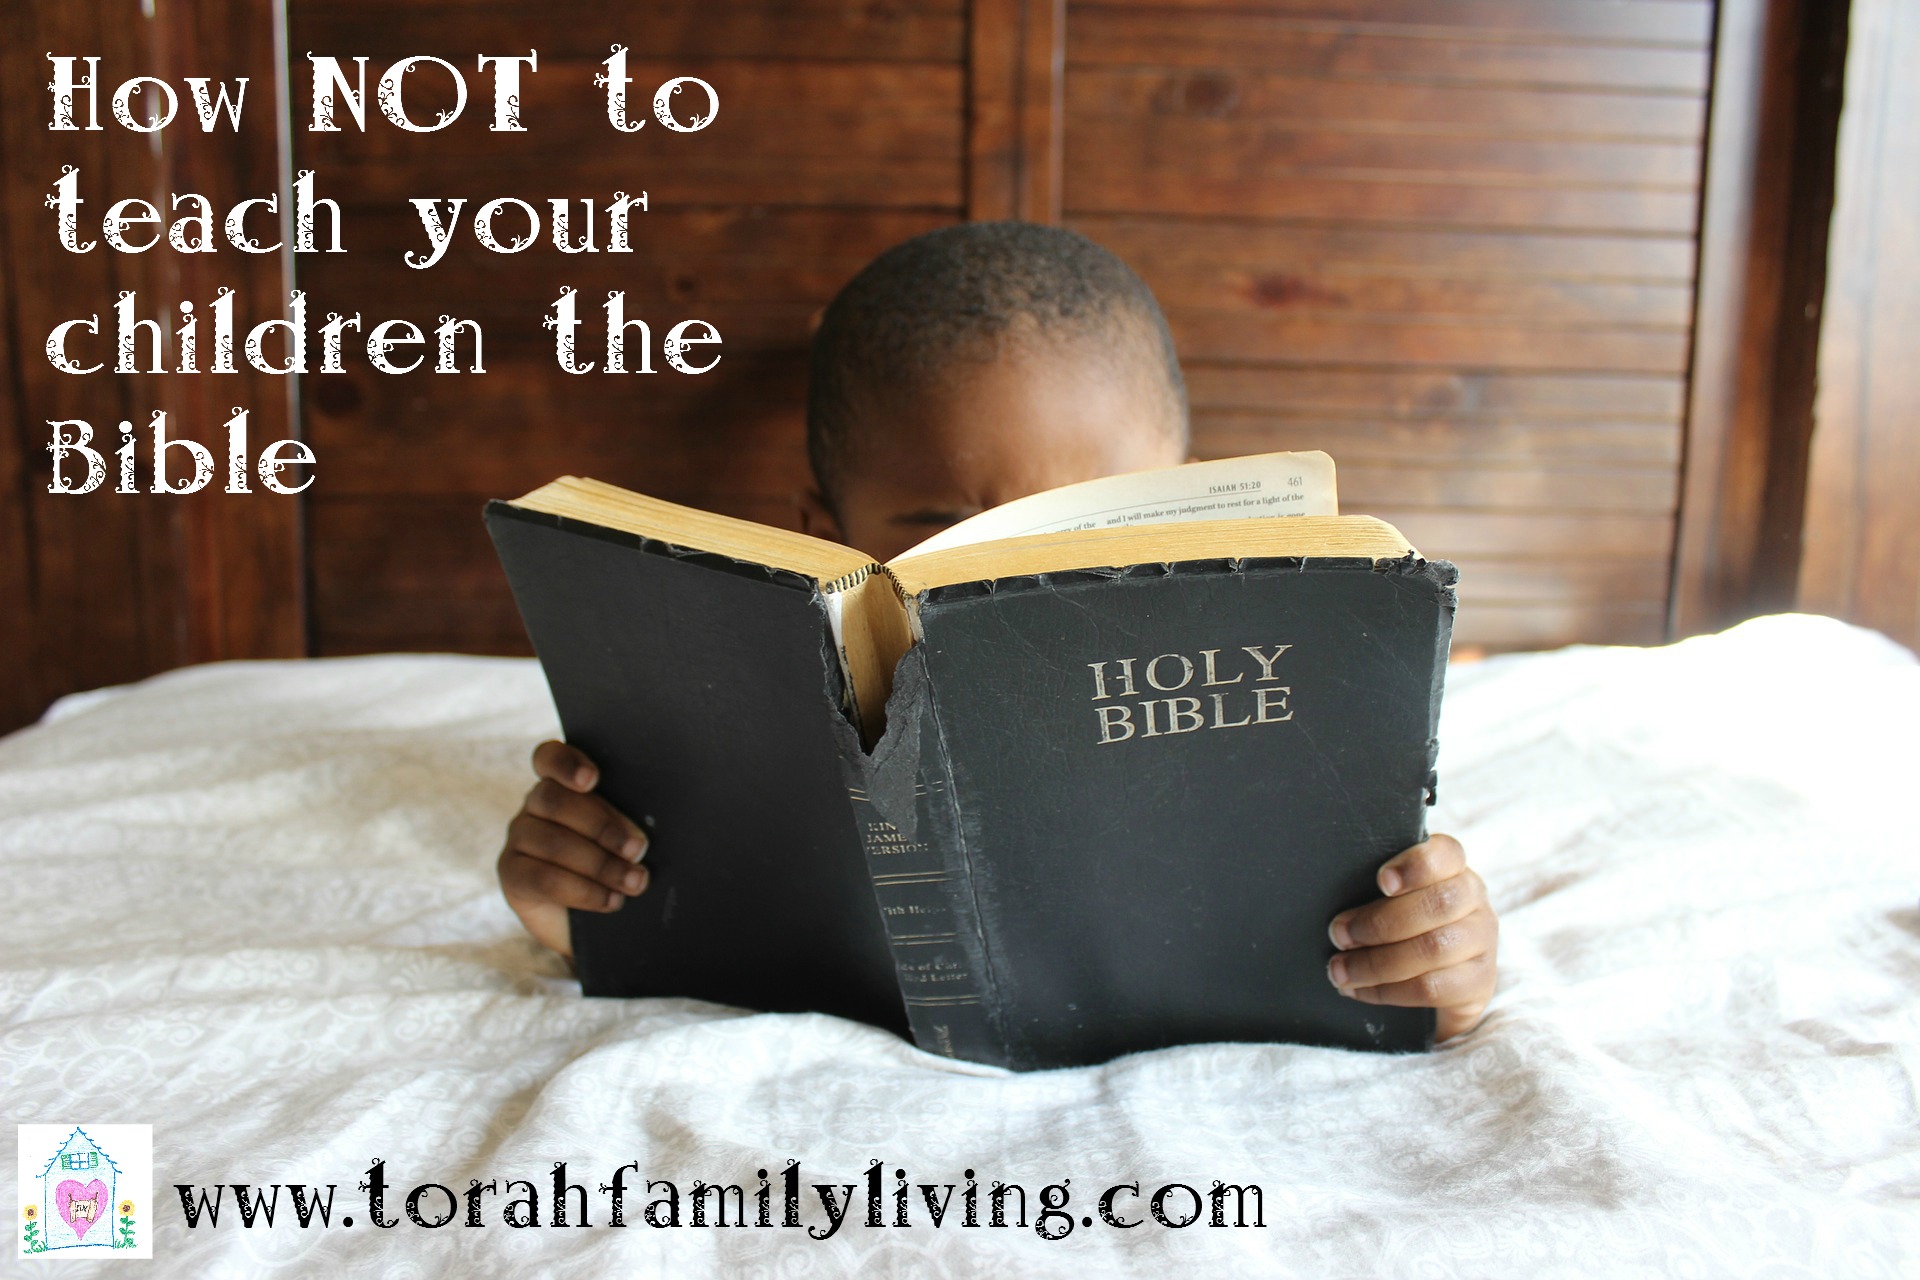 How not to teach your children the Bible